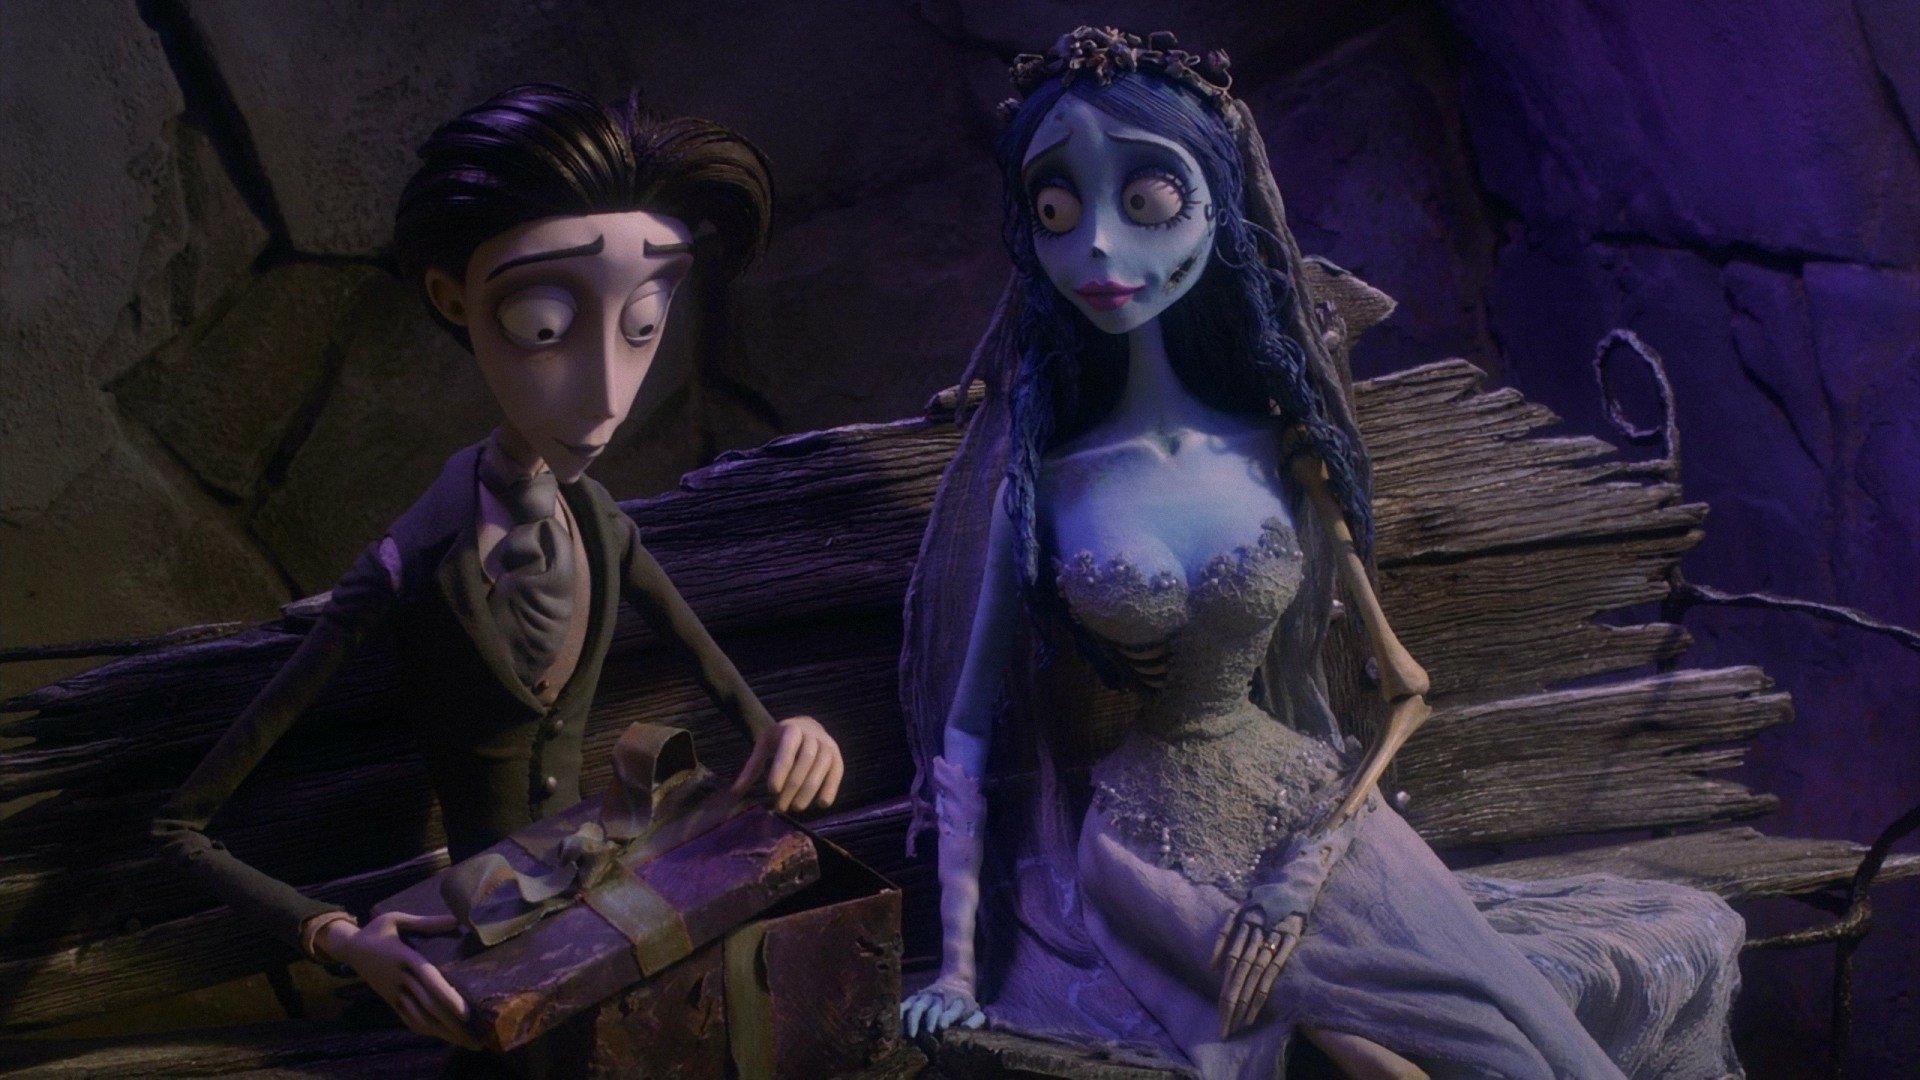 Emilythe corpse bride Images  Icons Wallpapers and Photos on Fanpop